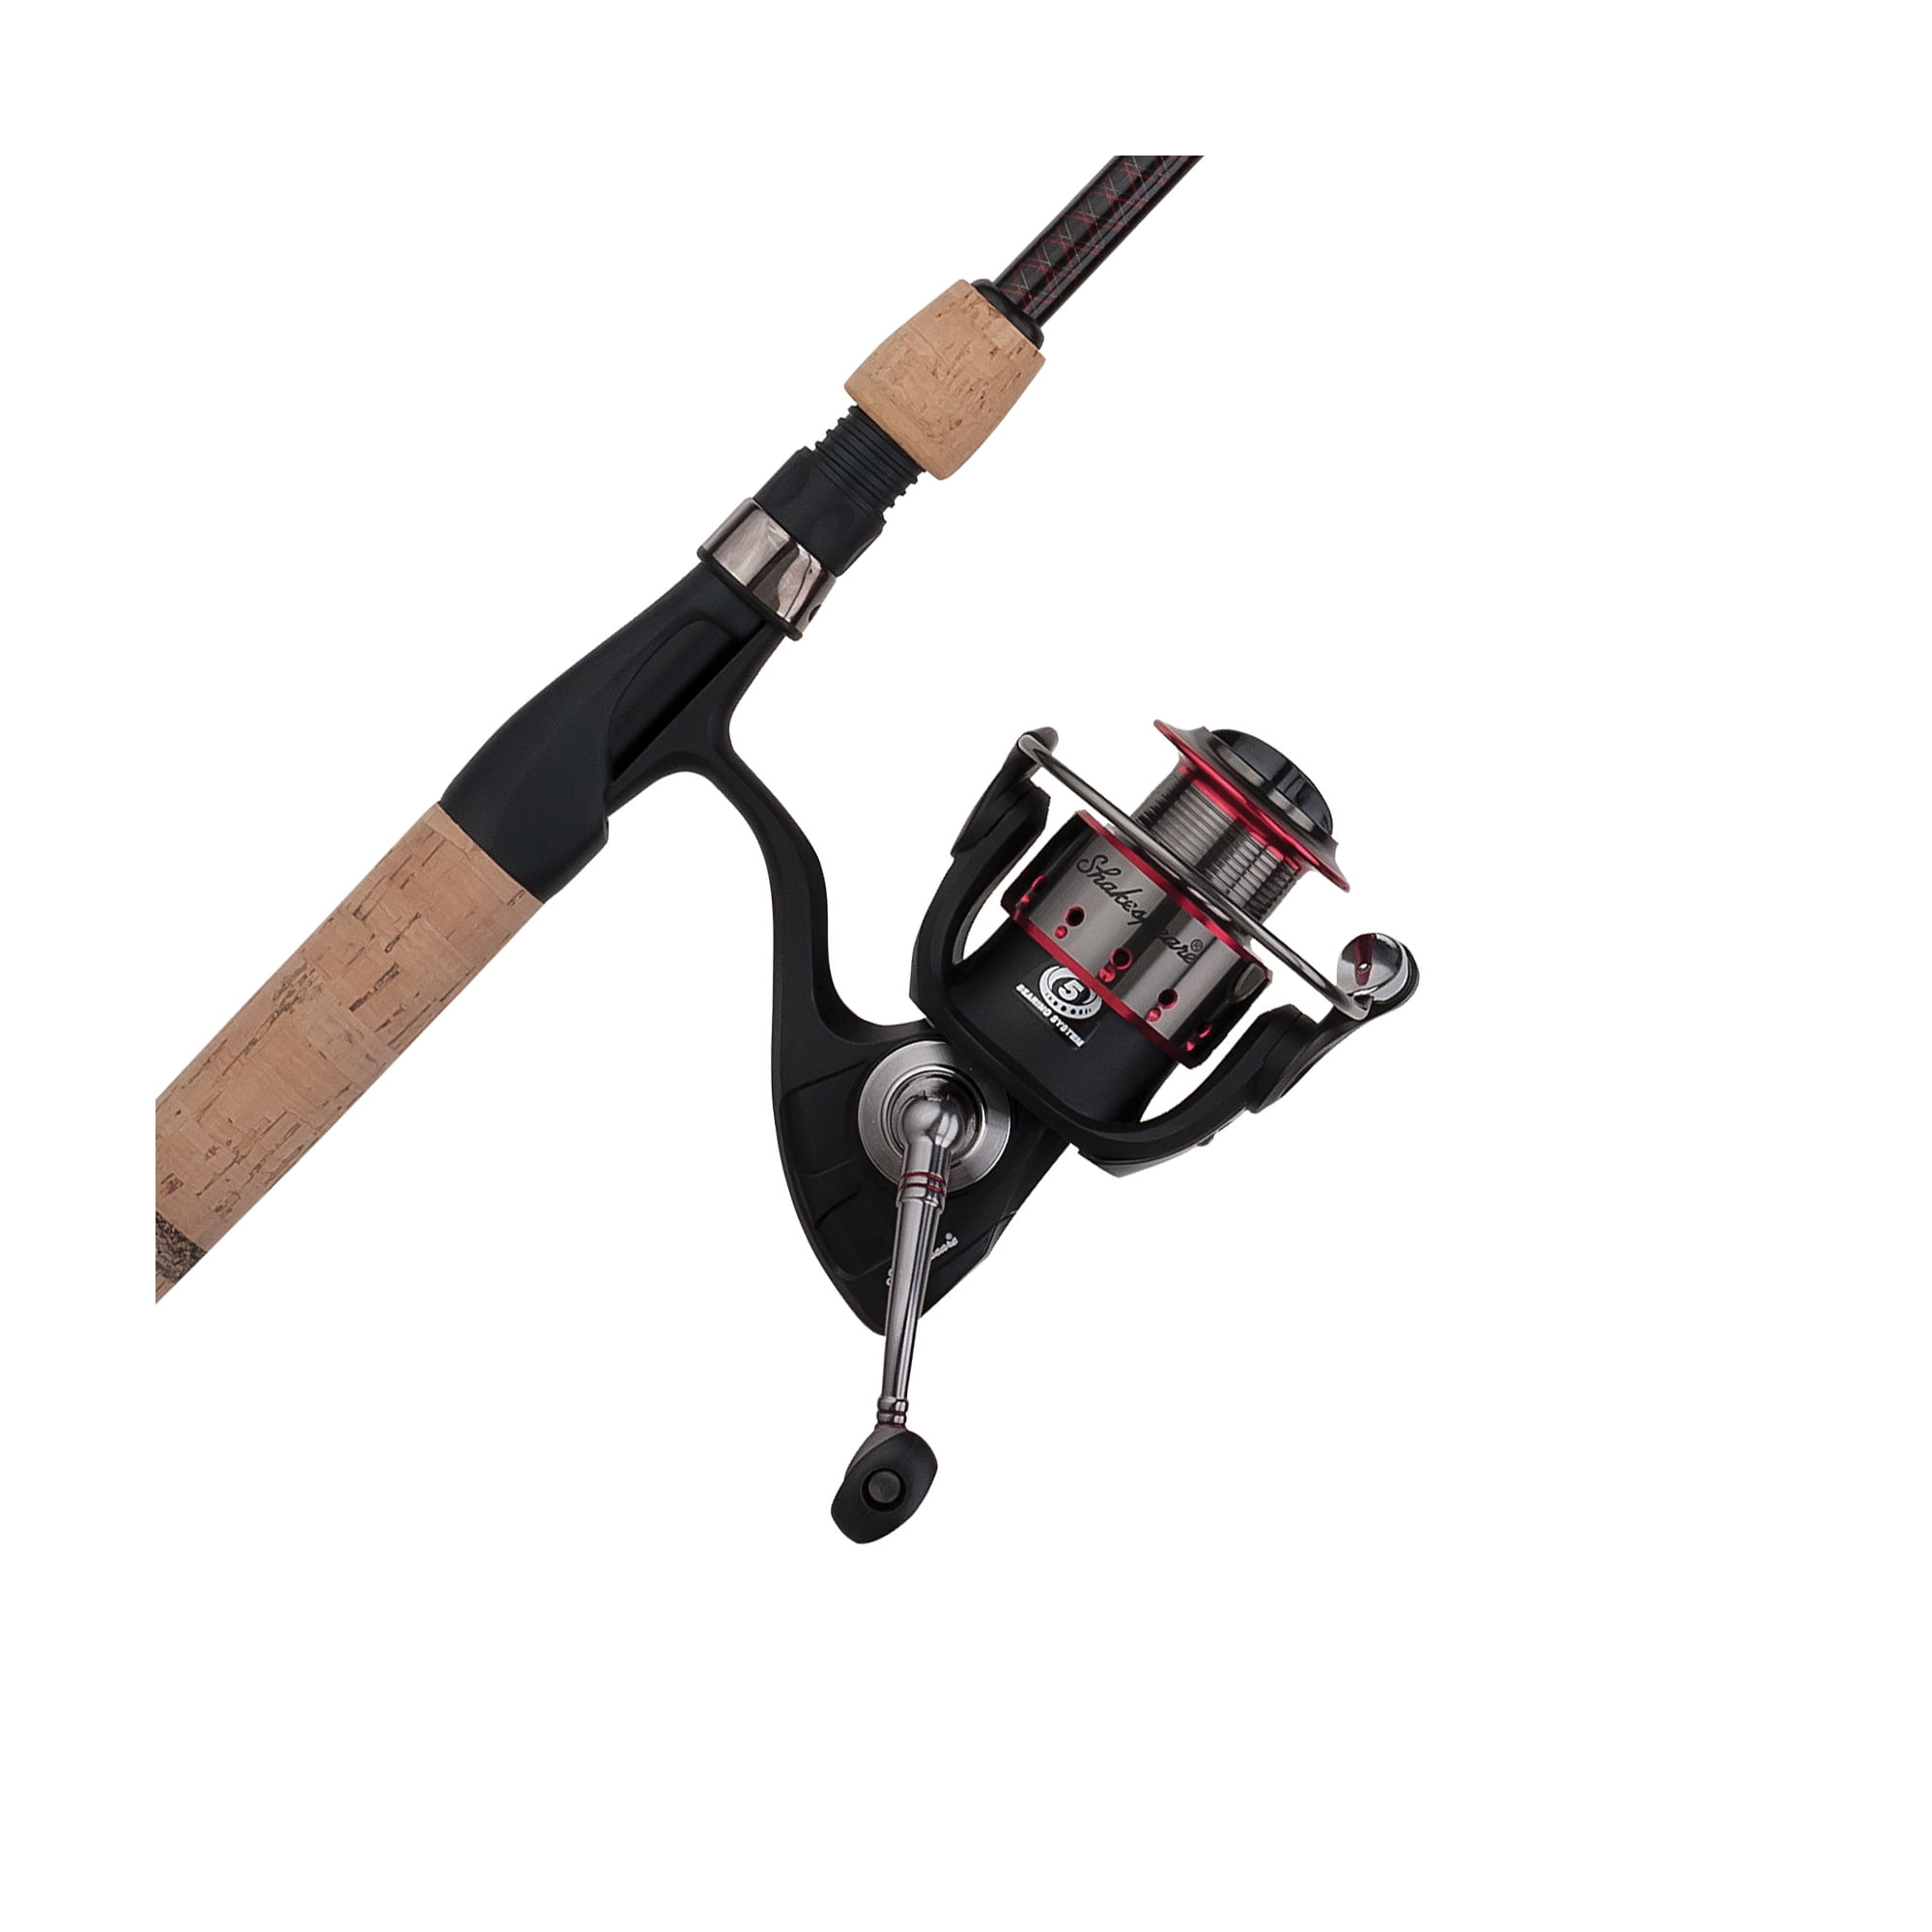 Shakespeare Ugly Stik Ultra Light and Medium Action Combos